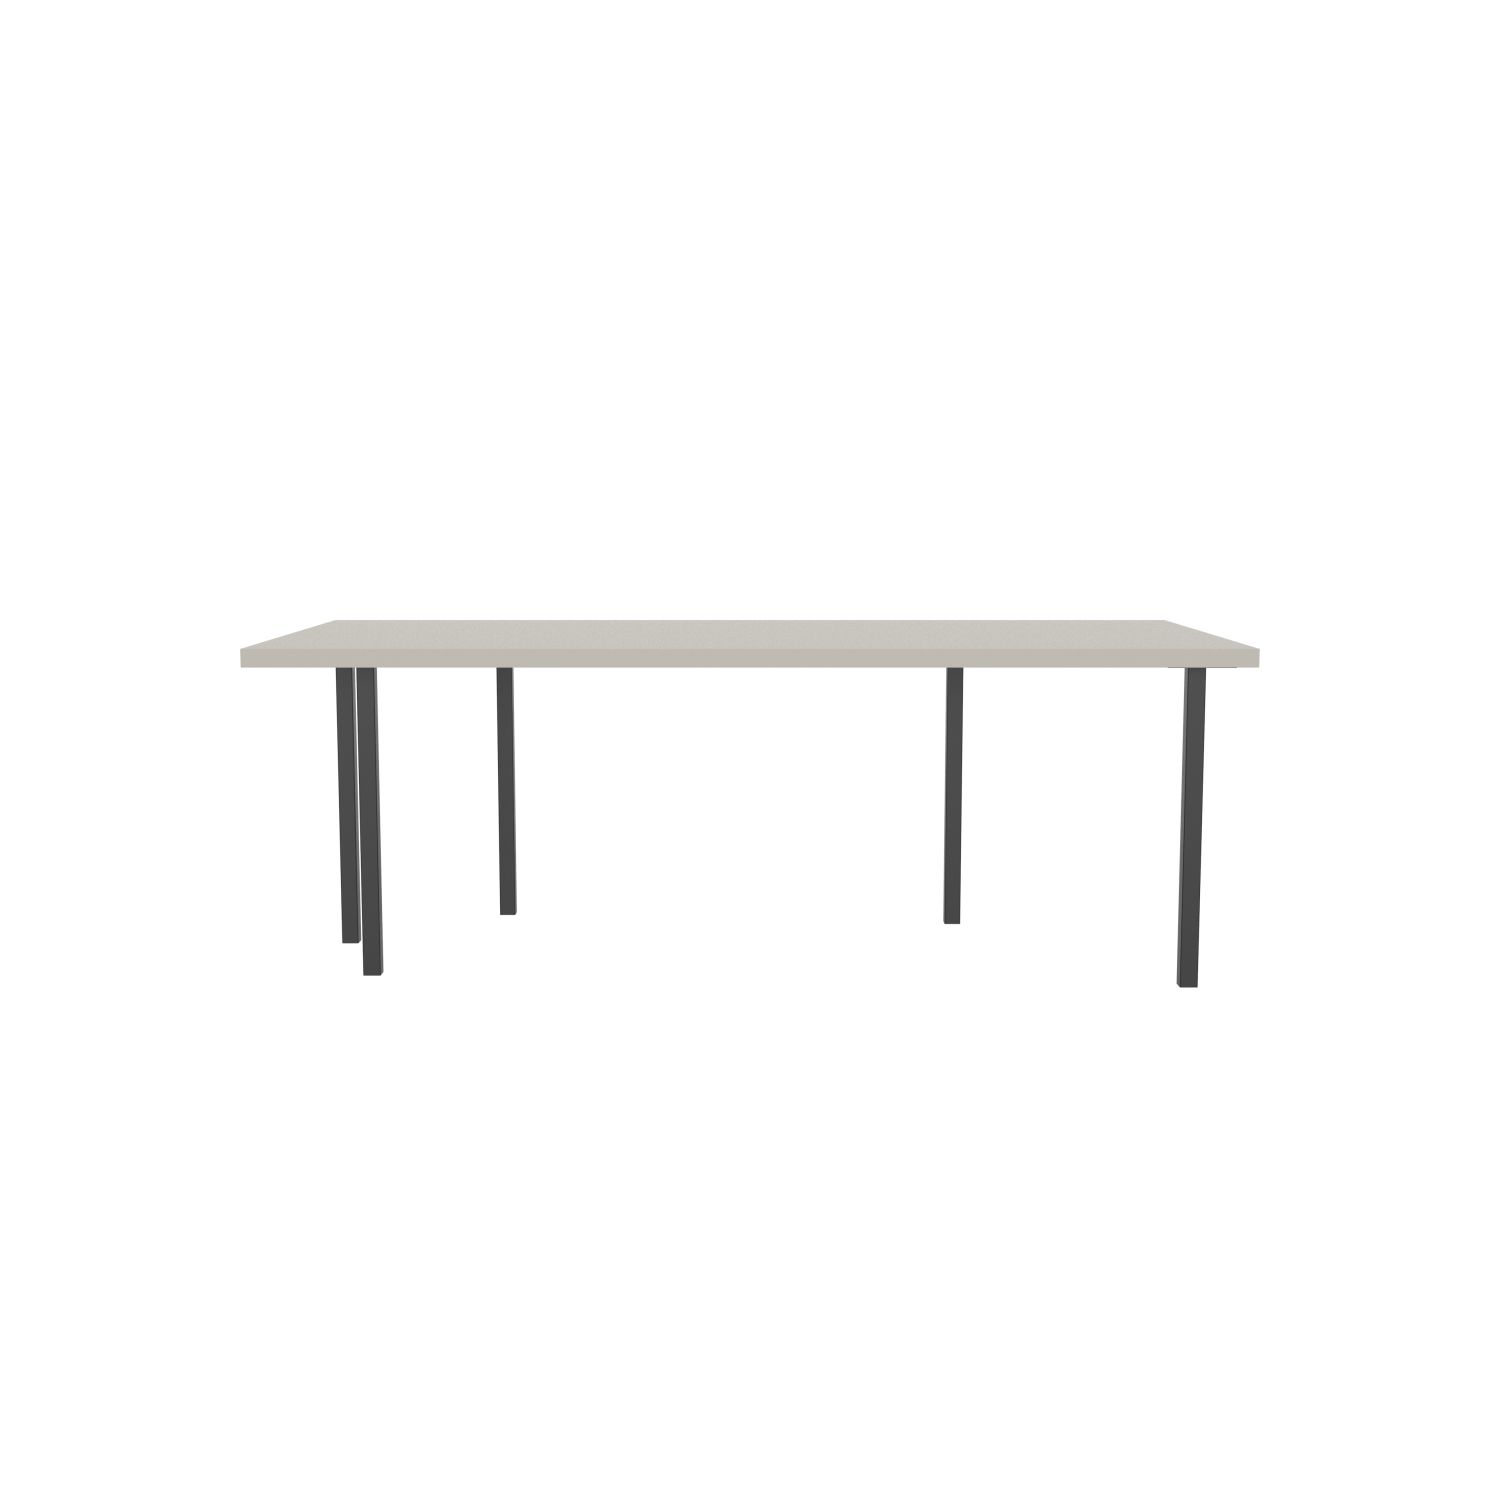 lensvelt bbrand table five fixed heigt 103x218 hpl white 50 mm price level 1 black ral9005